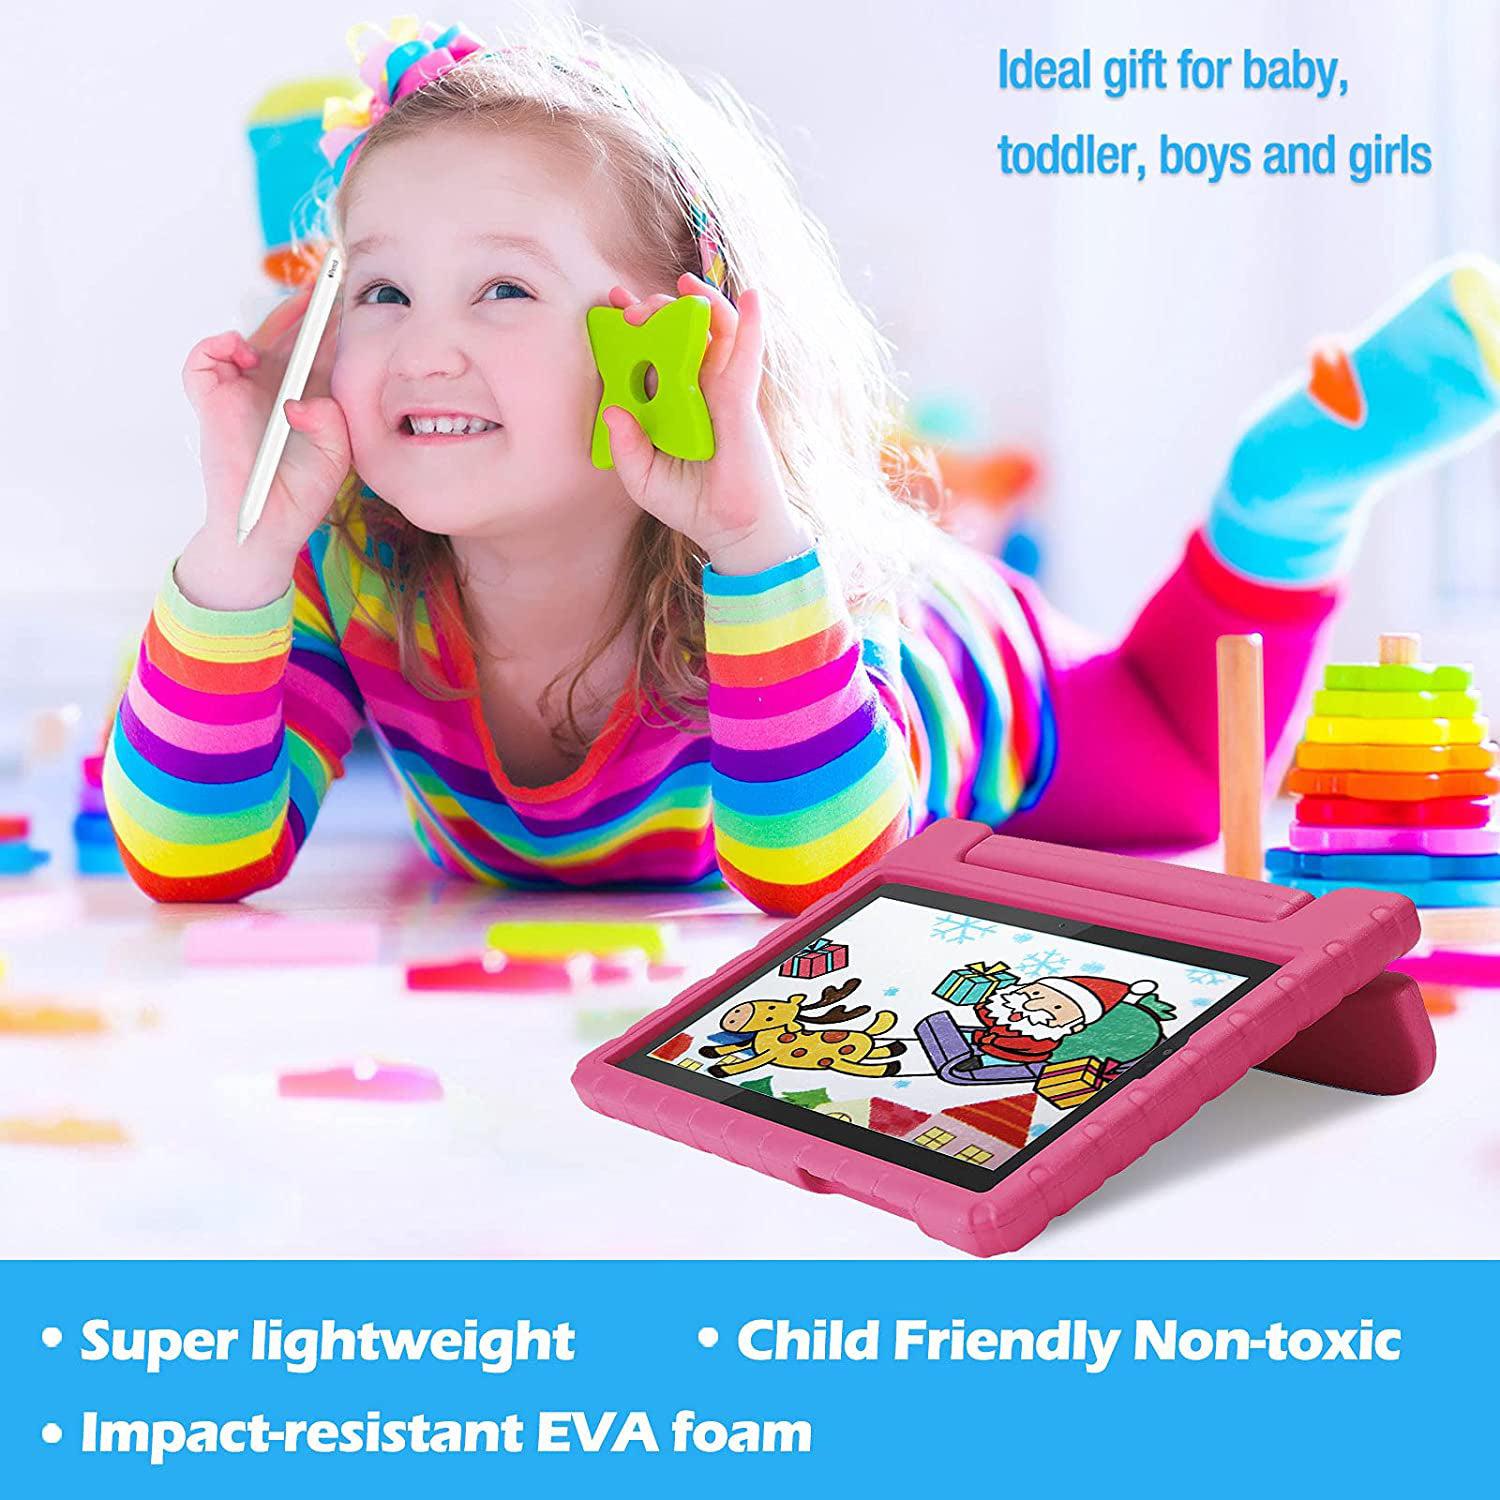 For Samsung Galaxy Tab A7 Lite Kids Case Shockproof Cover With Stand - Pink-Samsung Tablet Cases & Covers-First Help Tech